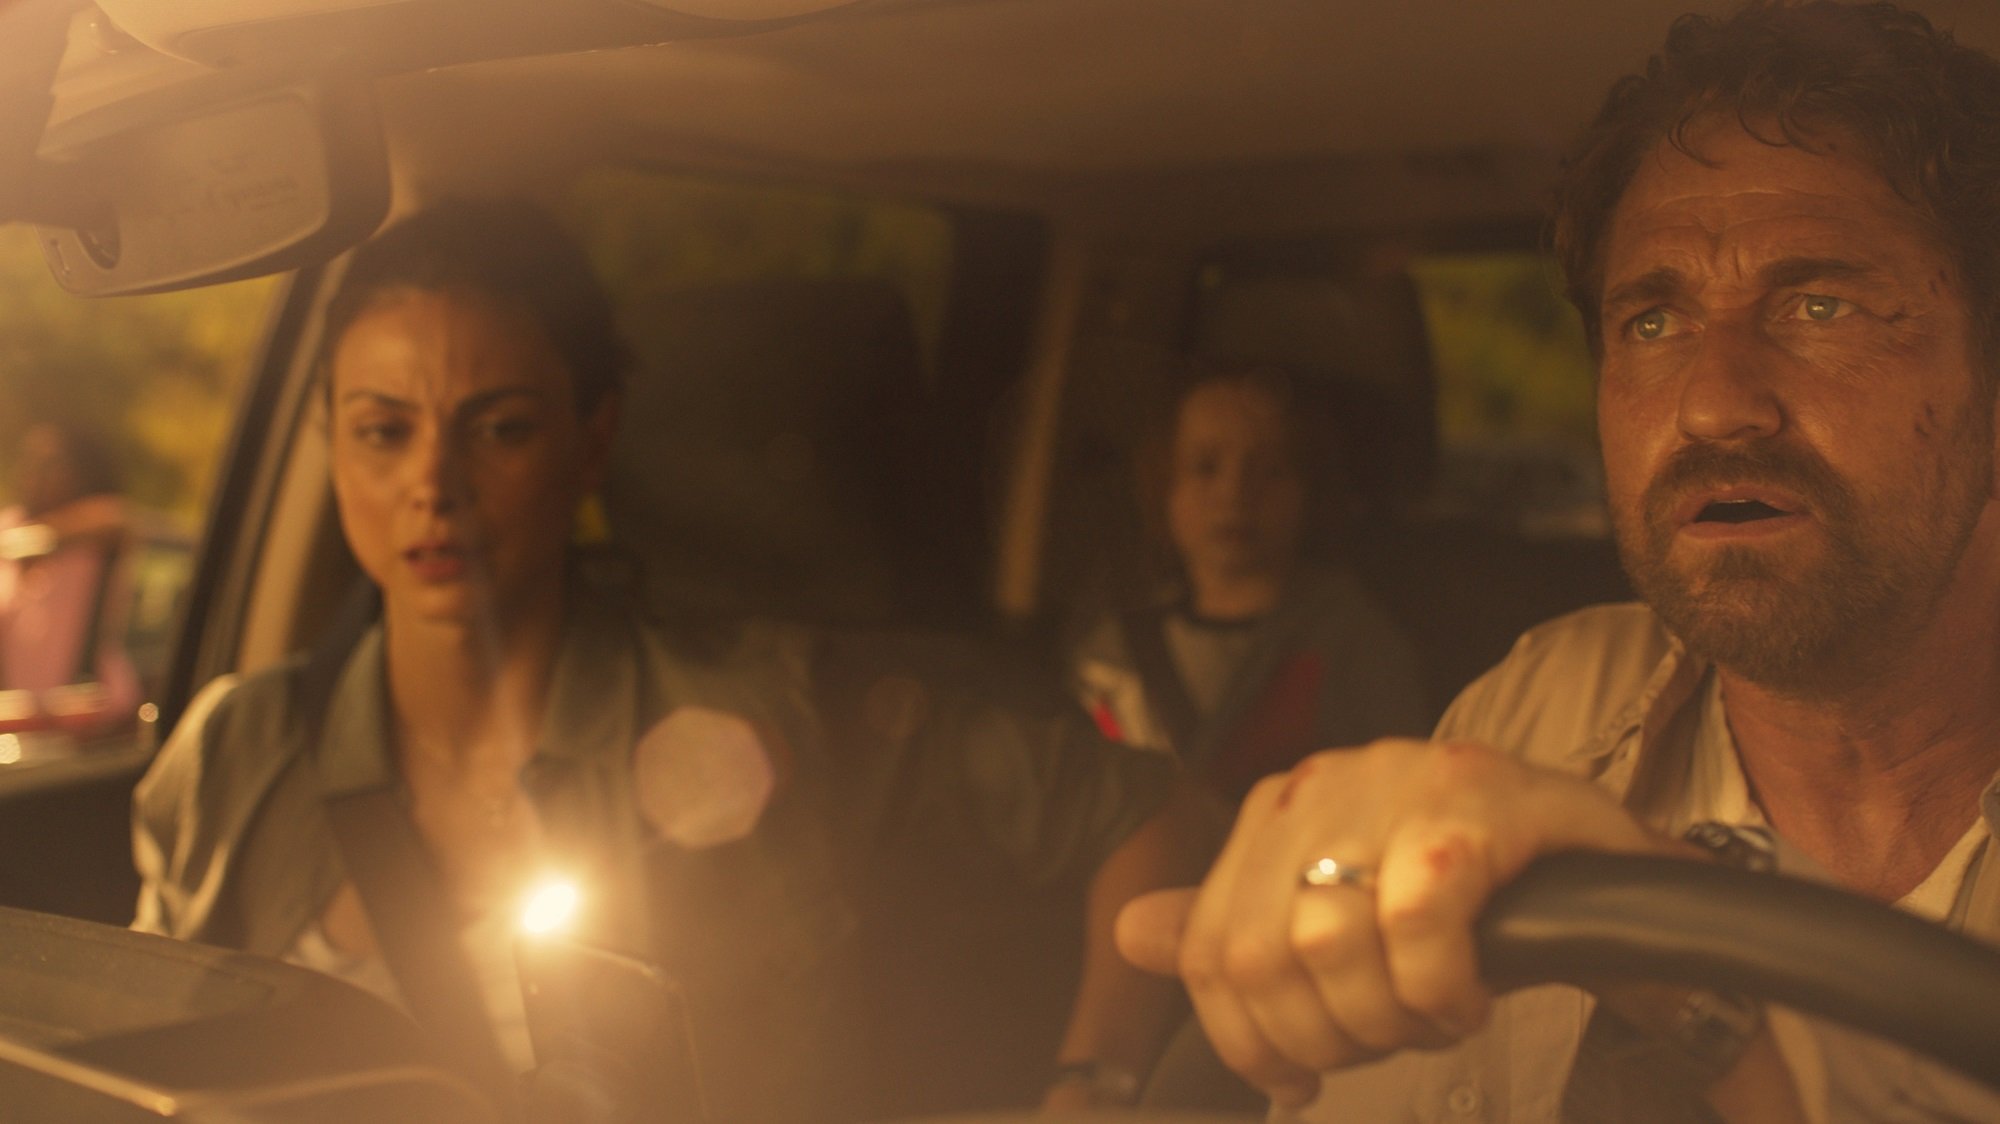 Gerard Butler, Morena Baccarin and Roger Dale Floyd drive together in a car